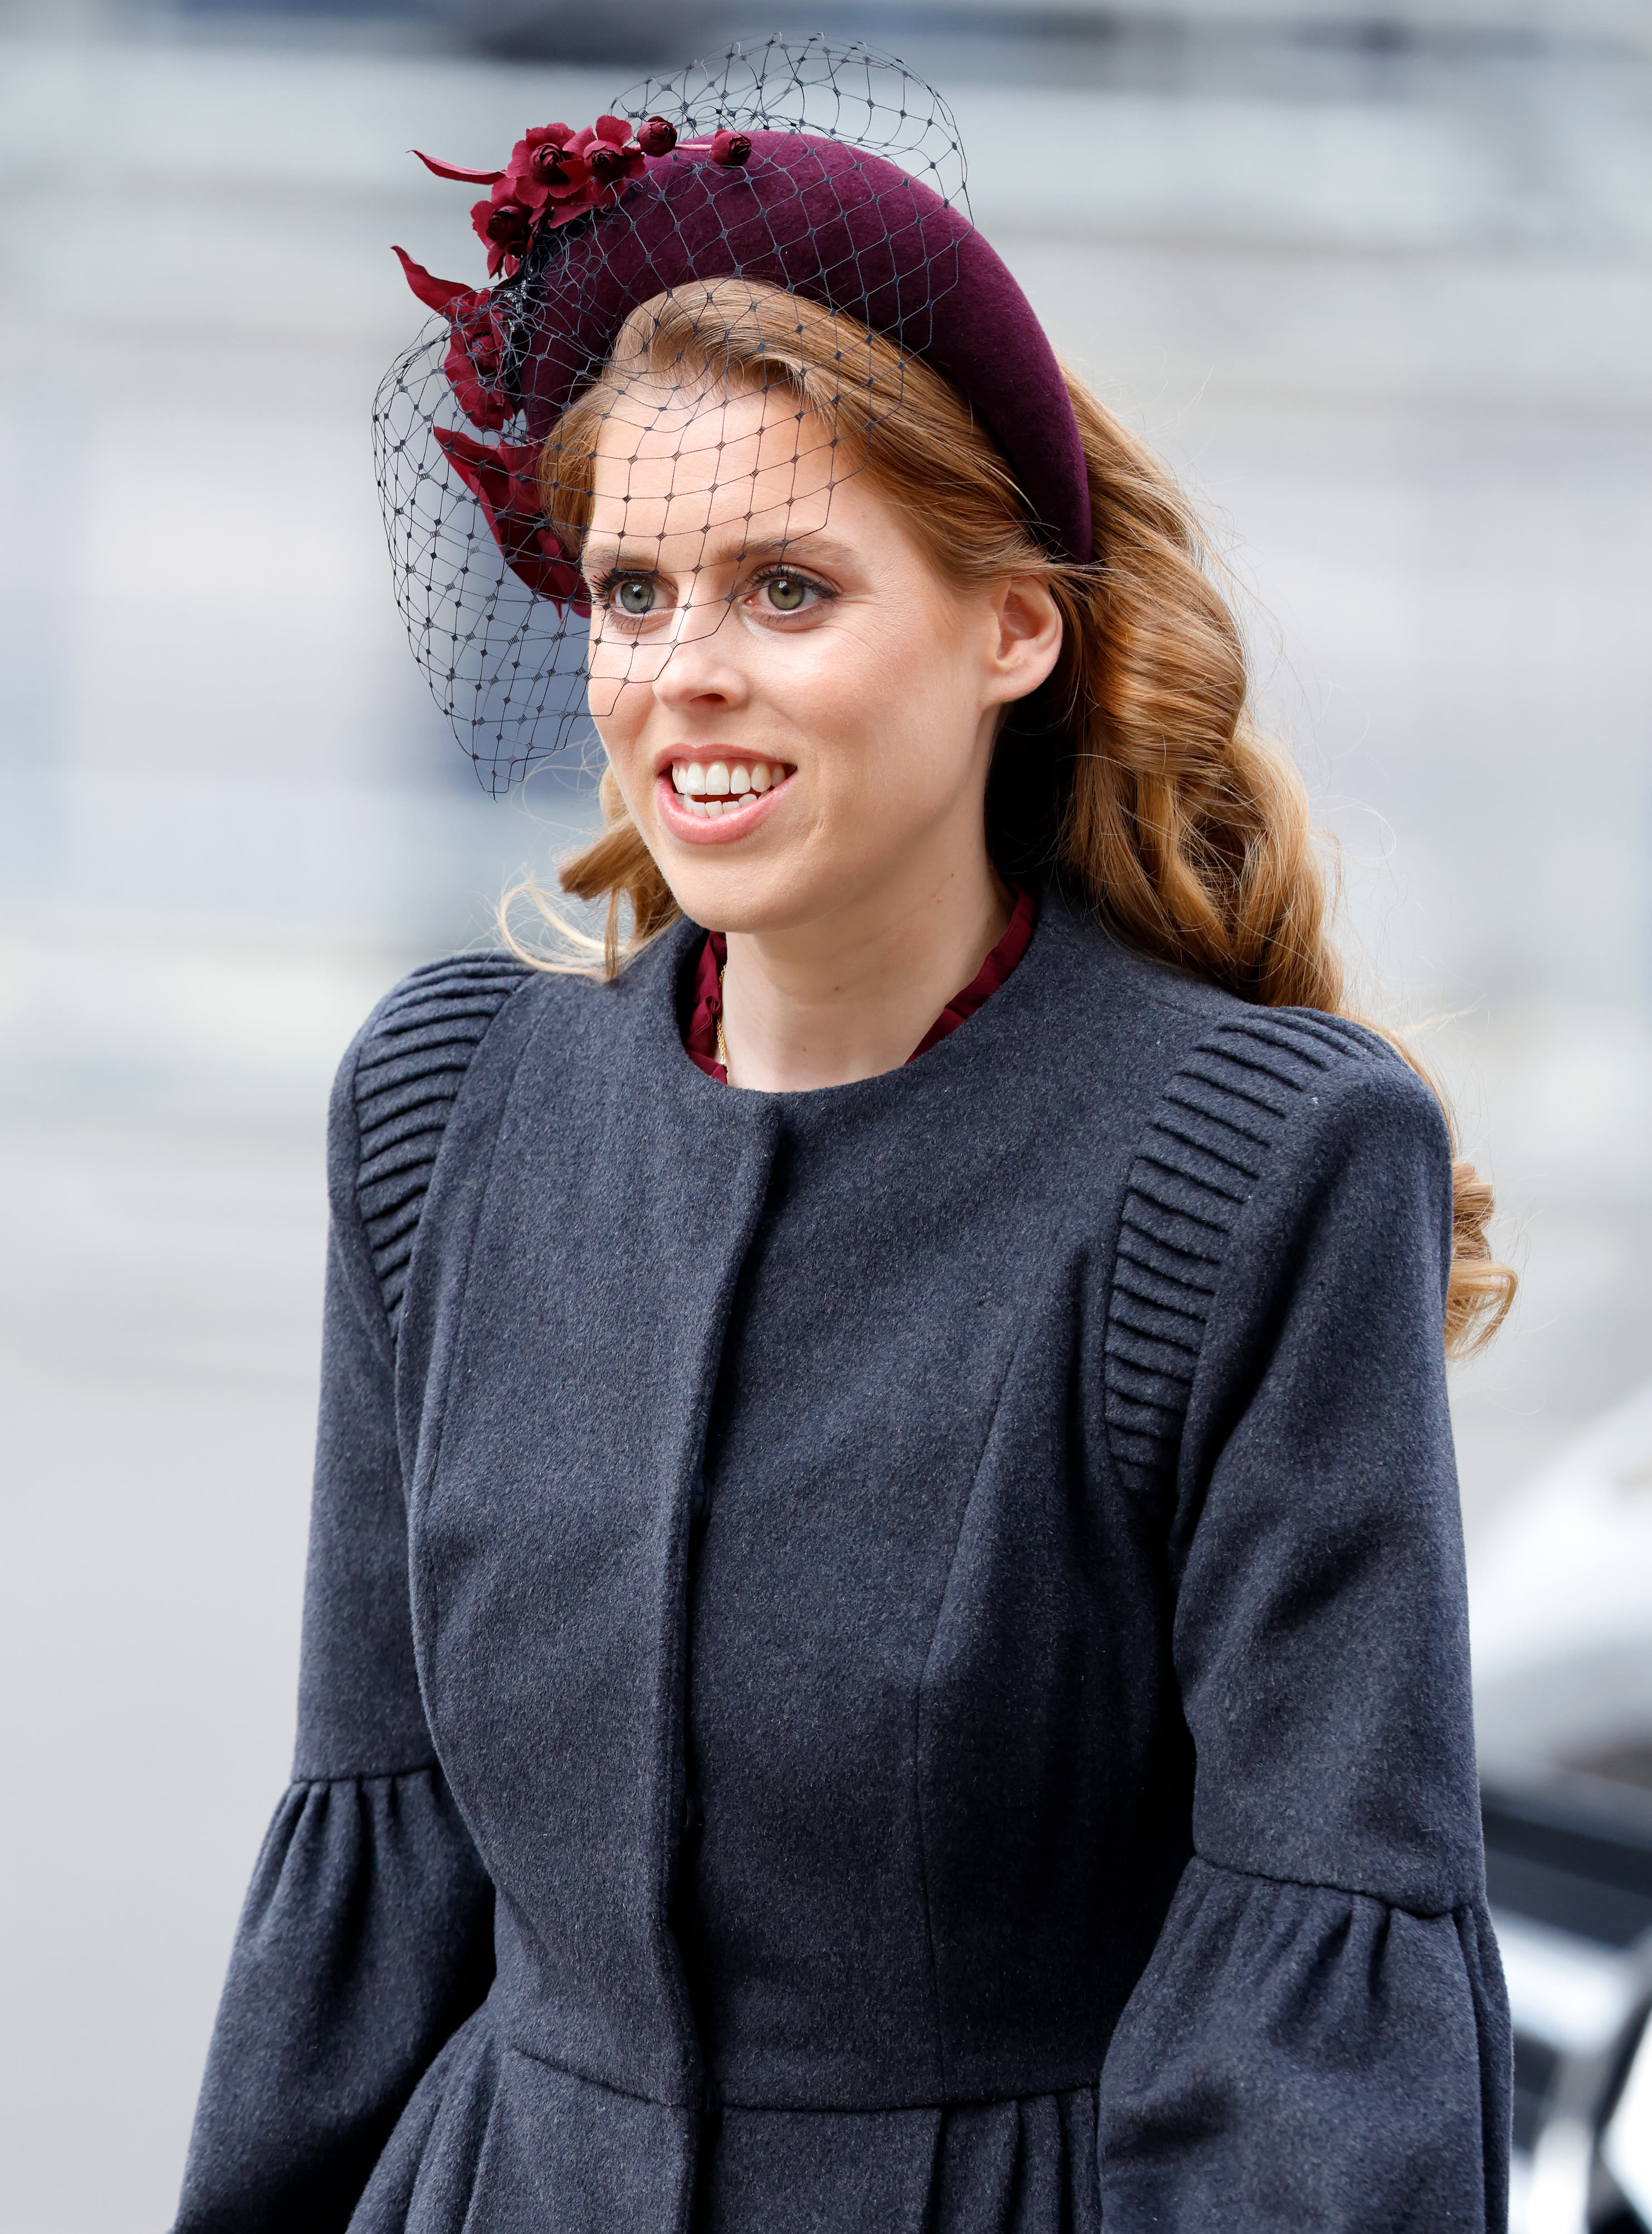 Princess Beatrice Has ‘Been Asked to Fill in’ for Kate Middleton Amid Cancer Diagnosis: Kate Has ‘Spiraled’